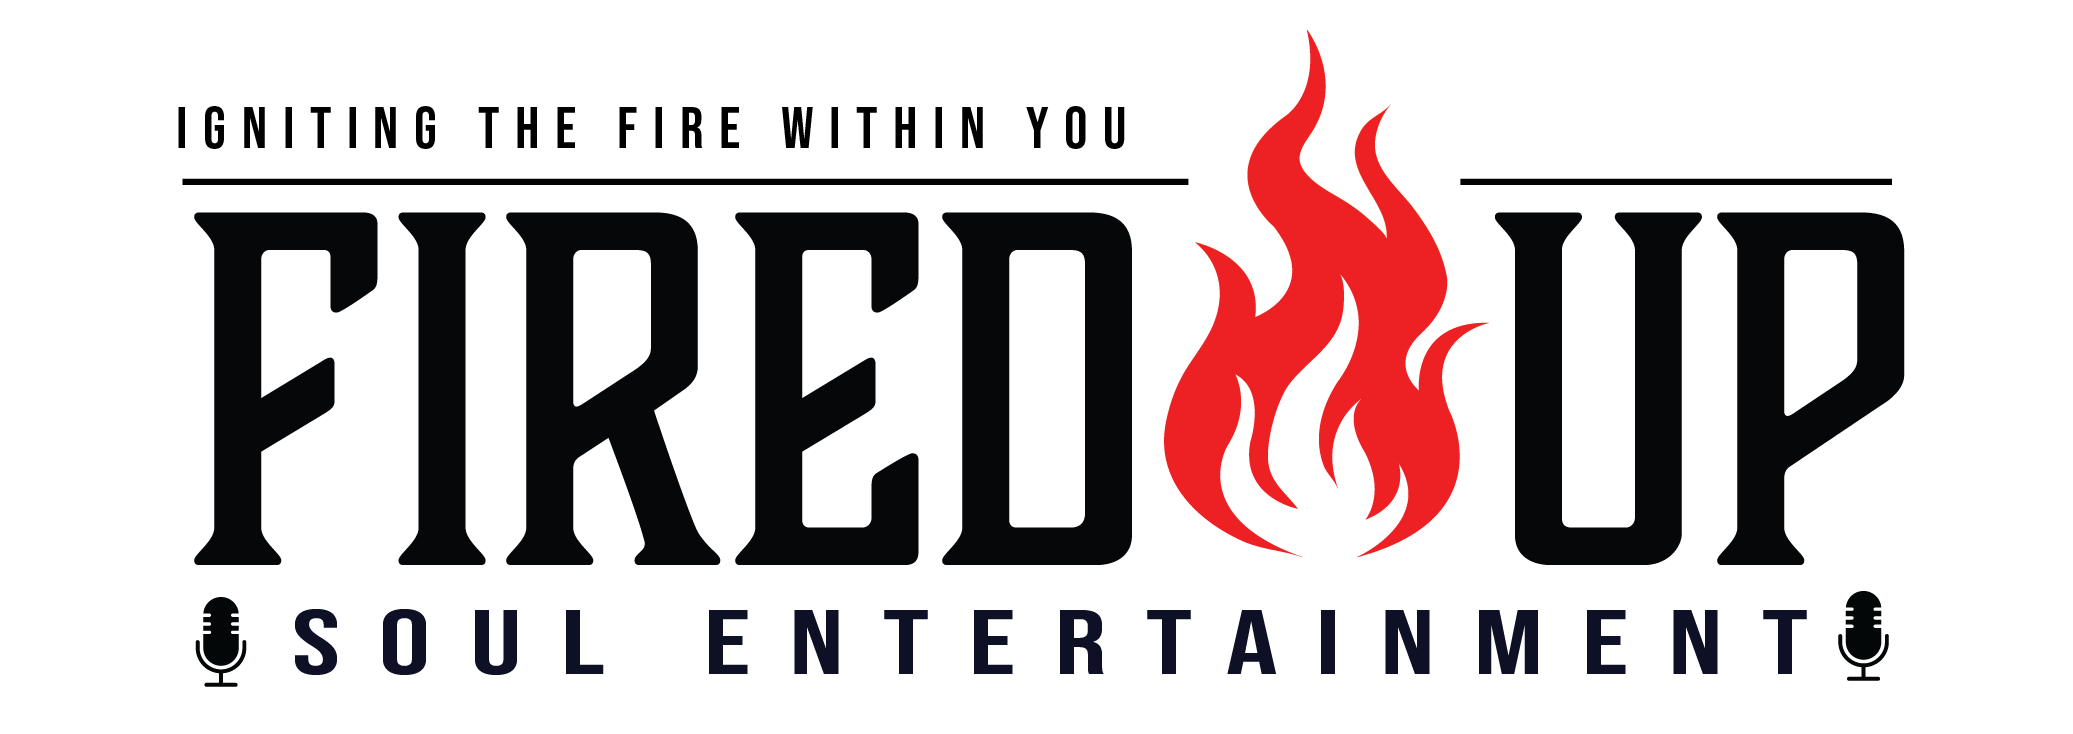 Fired Up Soul Entertainment - FUSE